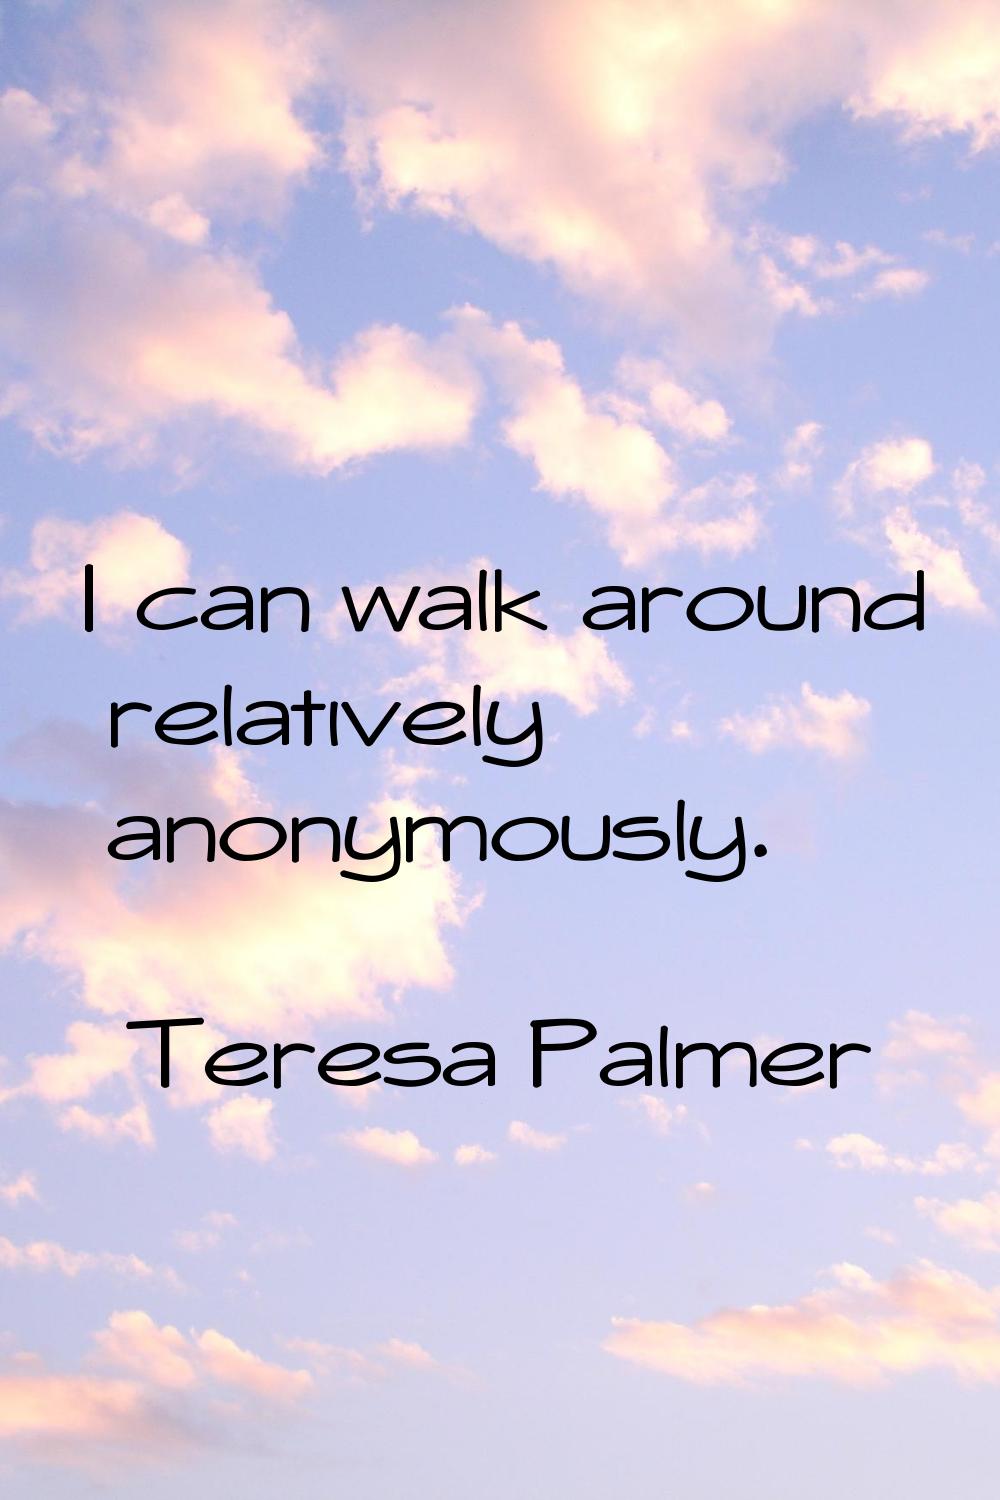 I can walk around relatively anonymously.